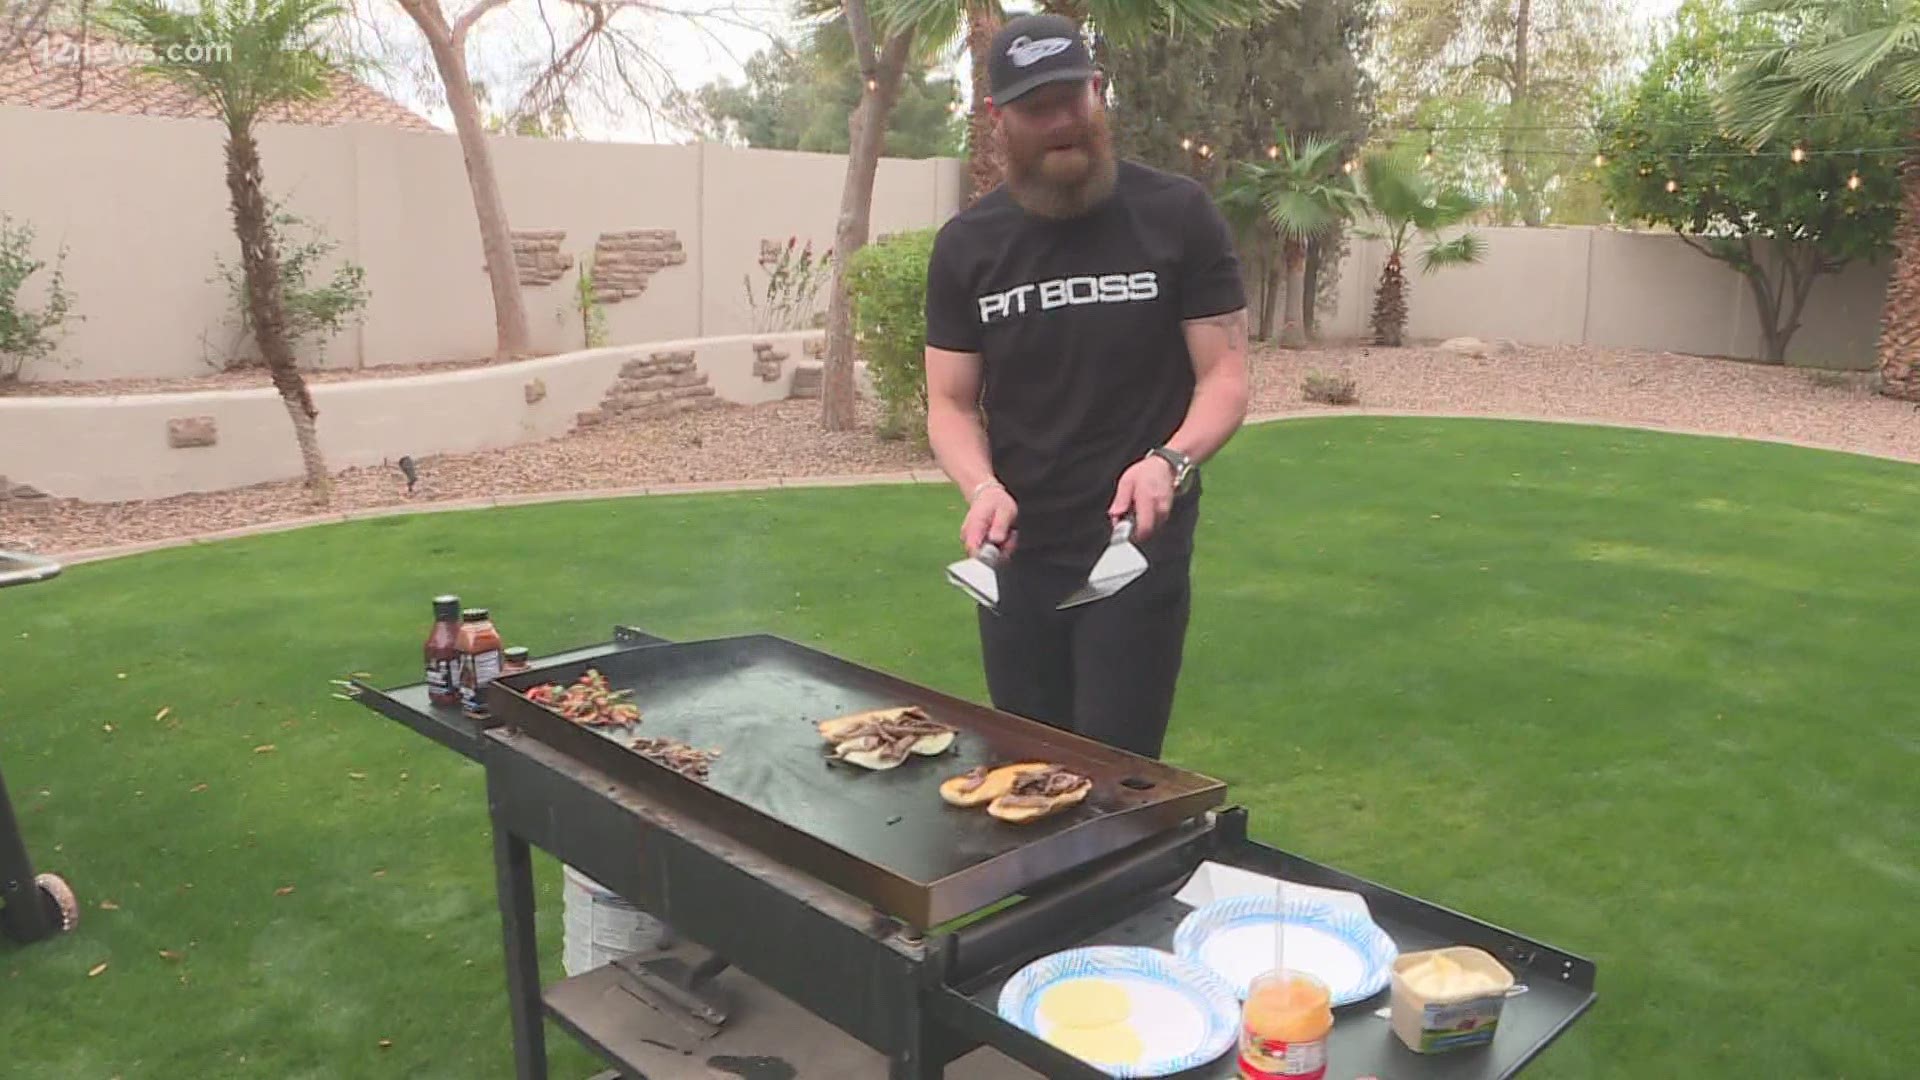 Big names are coming out to the Phoenix Open, including former Dbacks closer and fan favorite, Archie Bradley. He's back in town and grilling up a new adventure.